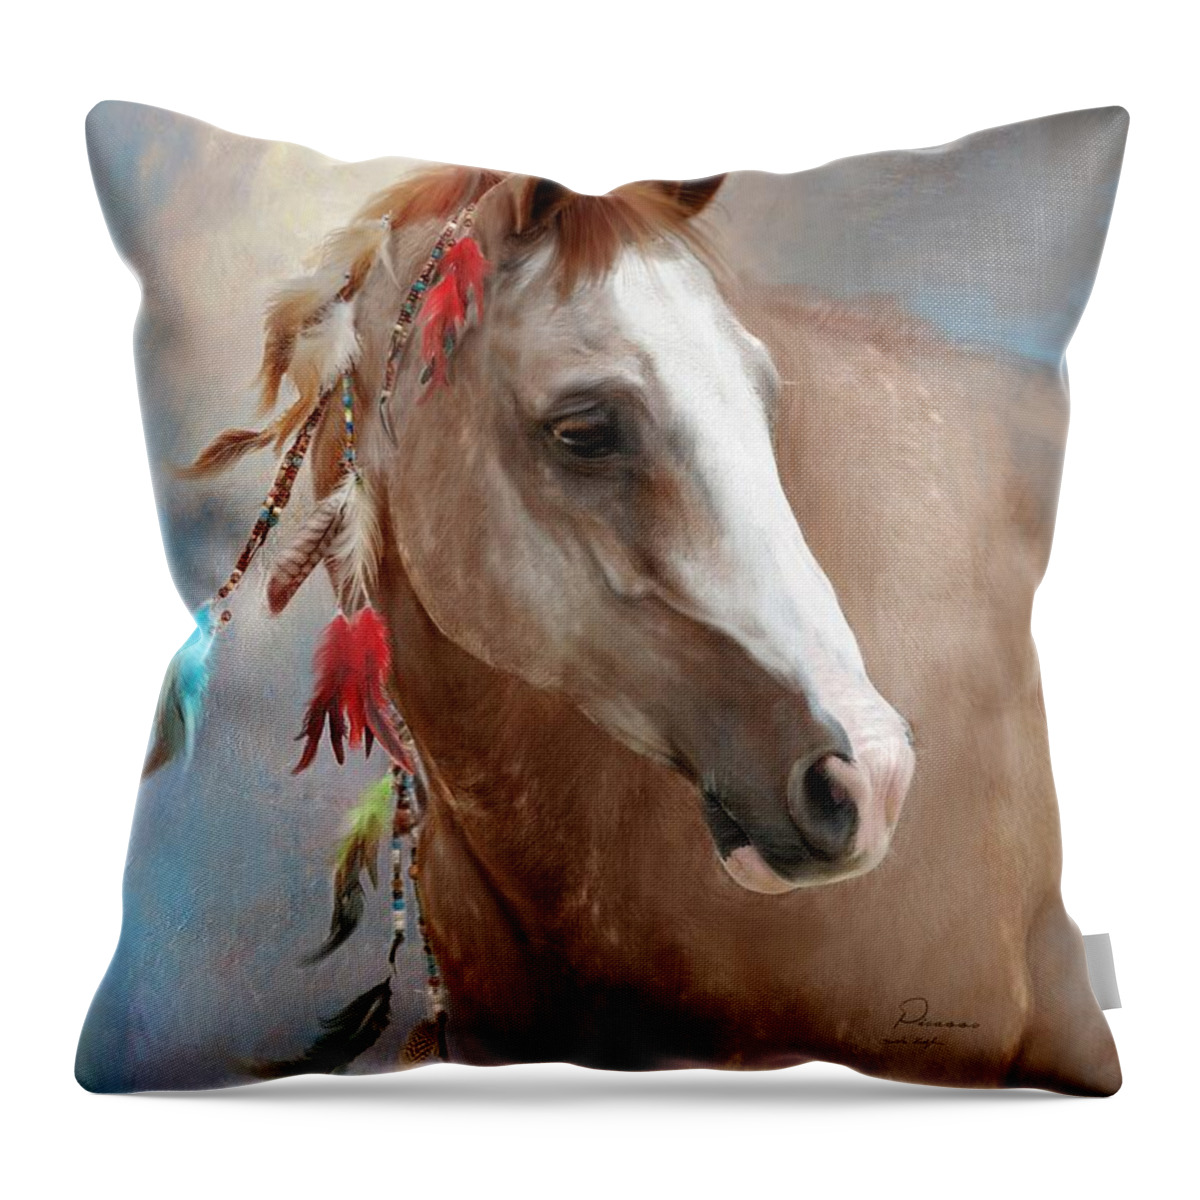 Horse Throw Pillow featuring the digital art Whispy Feathers by Dorota Kudyba